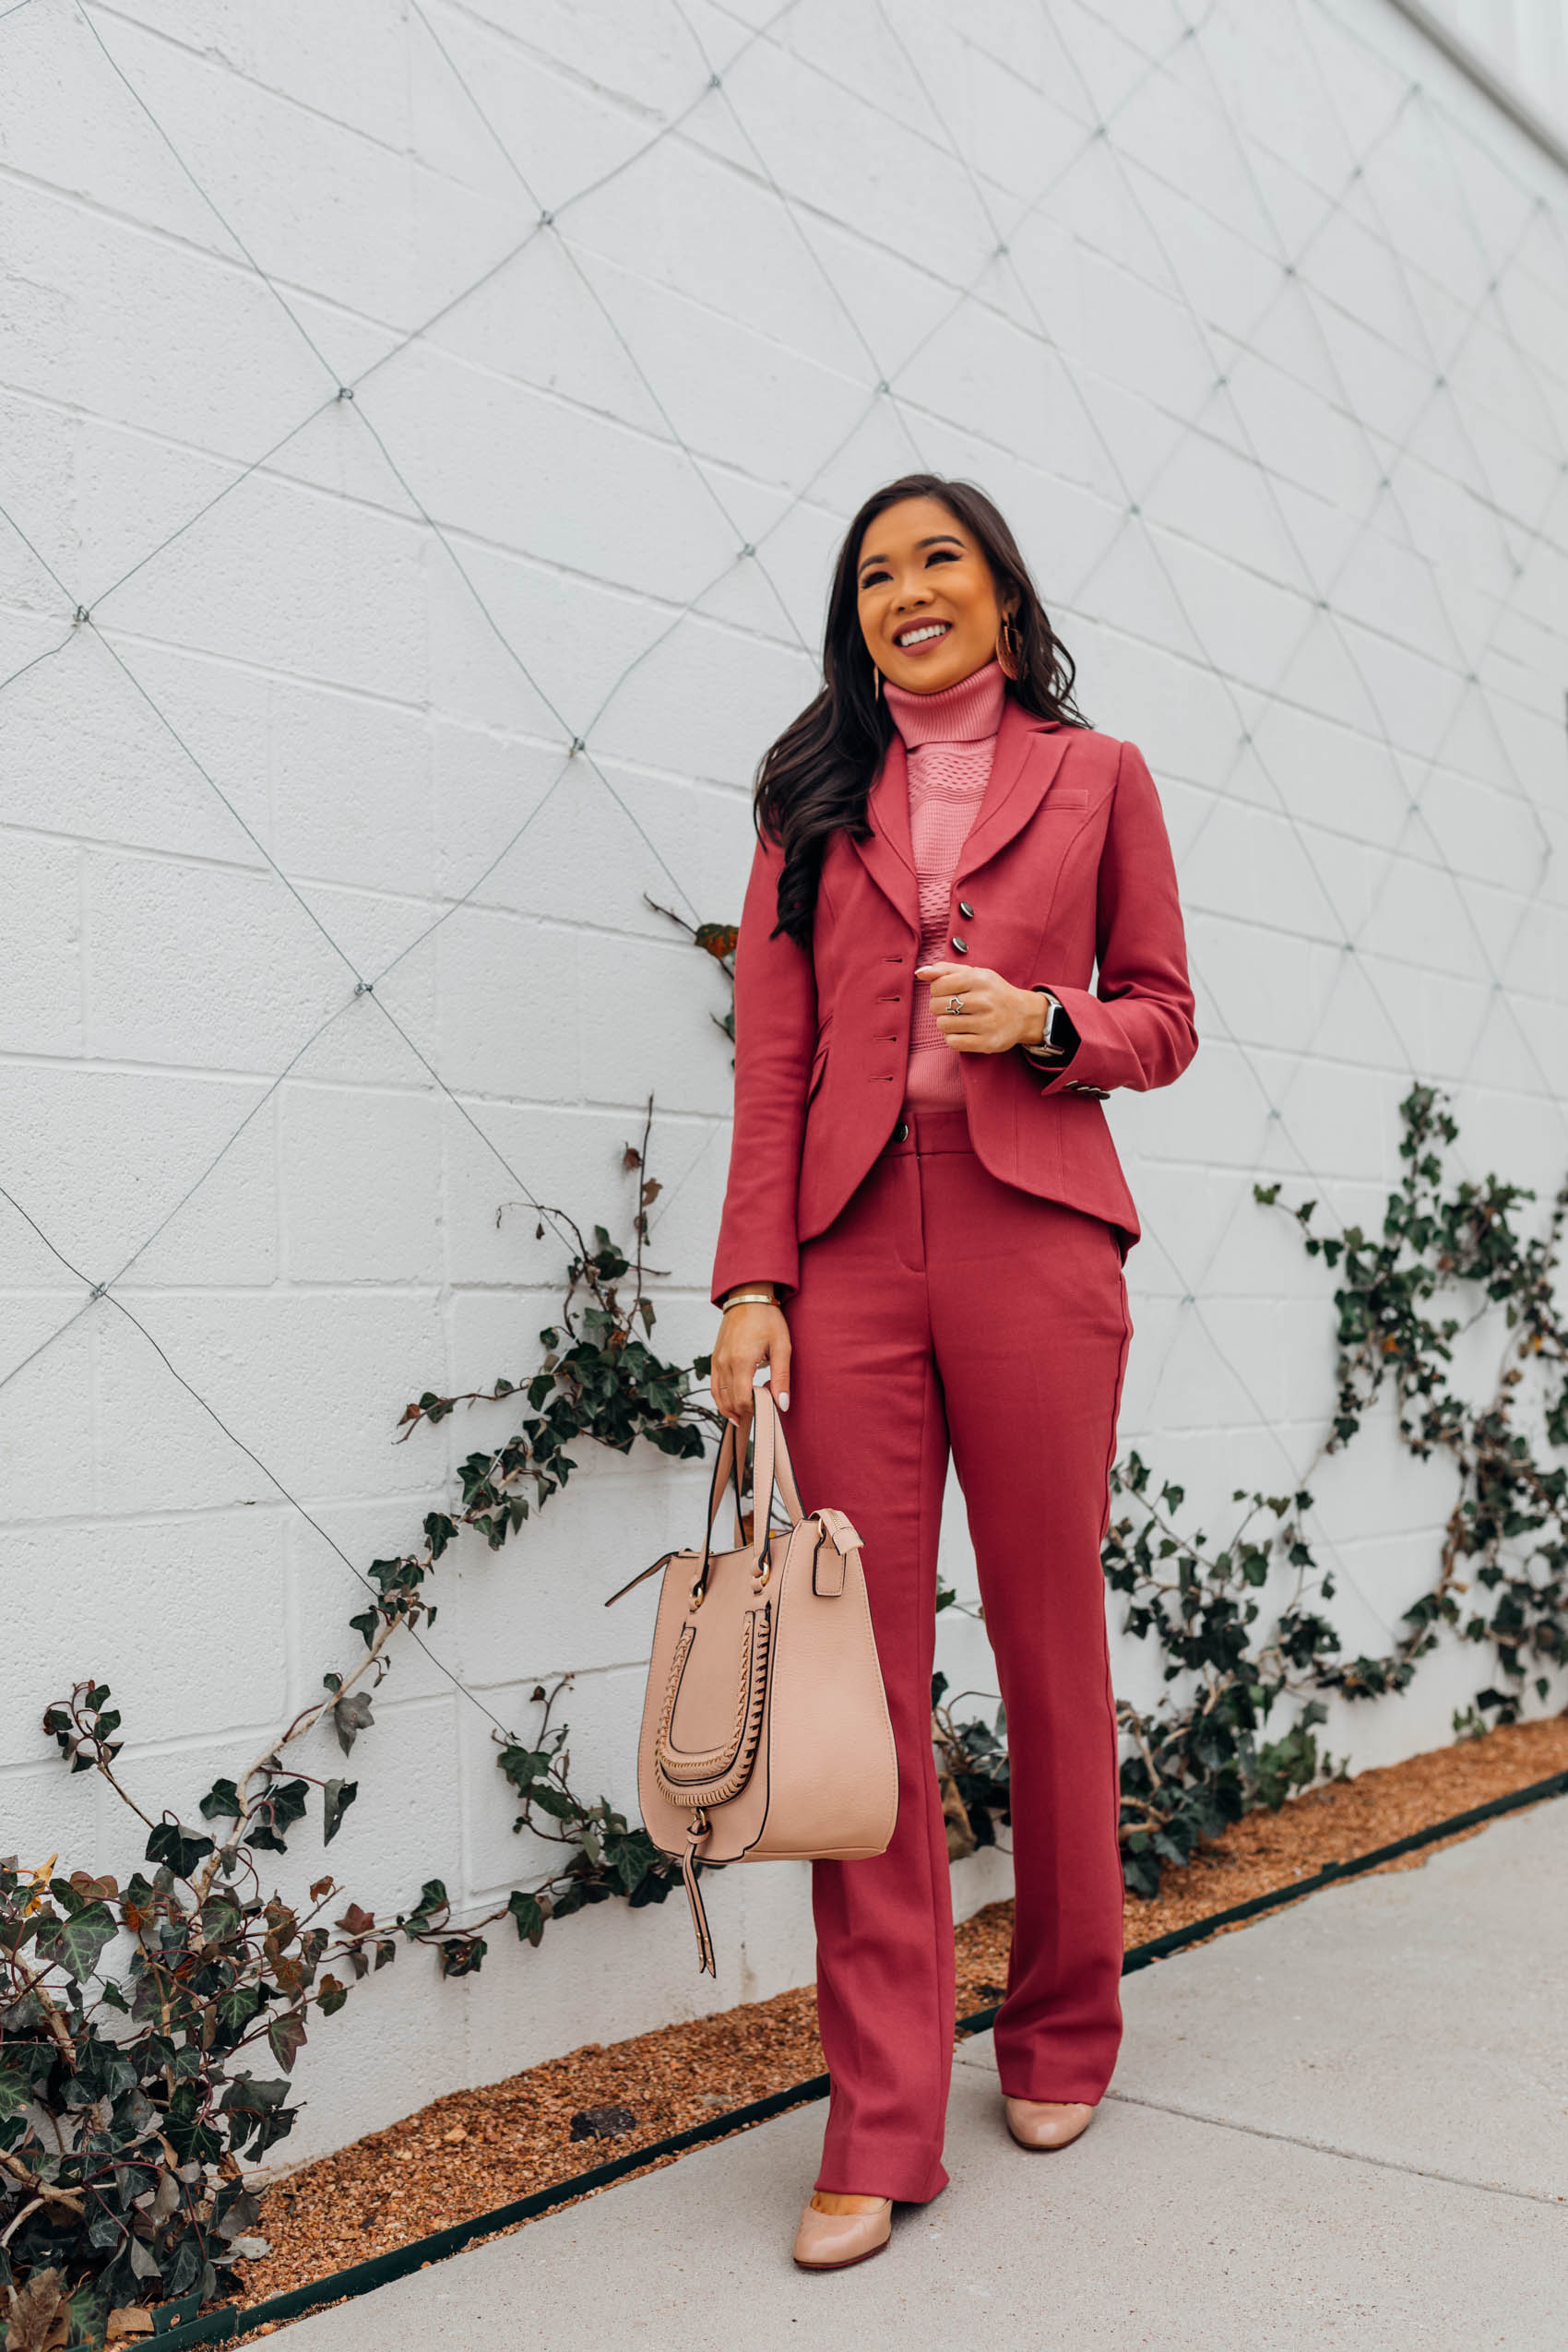 Blogger Hoang-Kim shares a rusty red pantsuit from White House Black Market